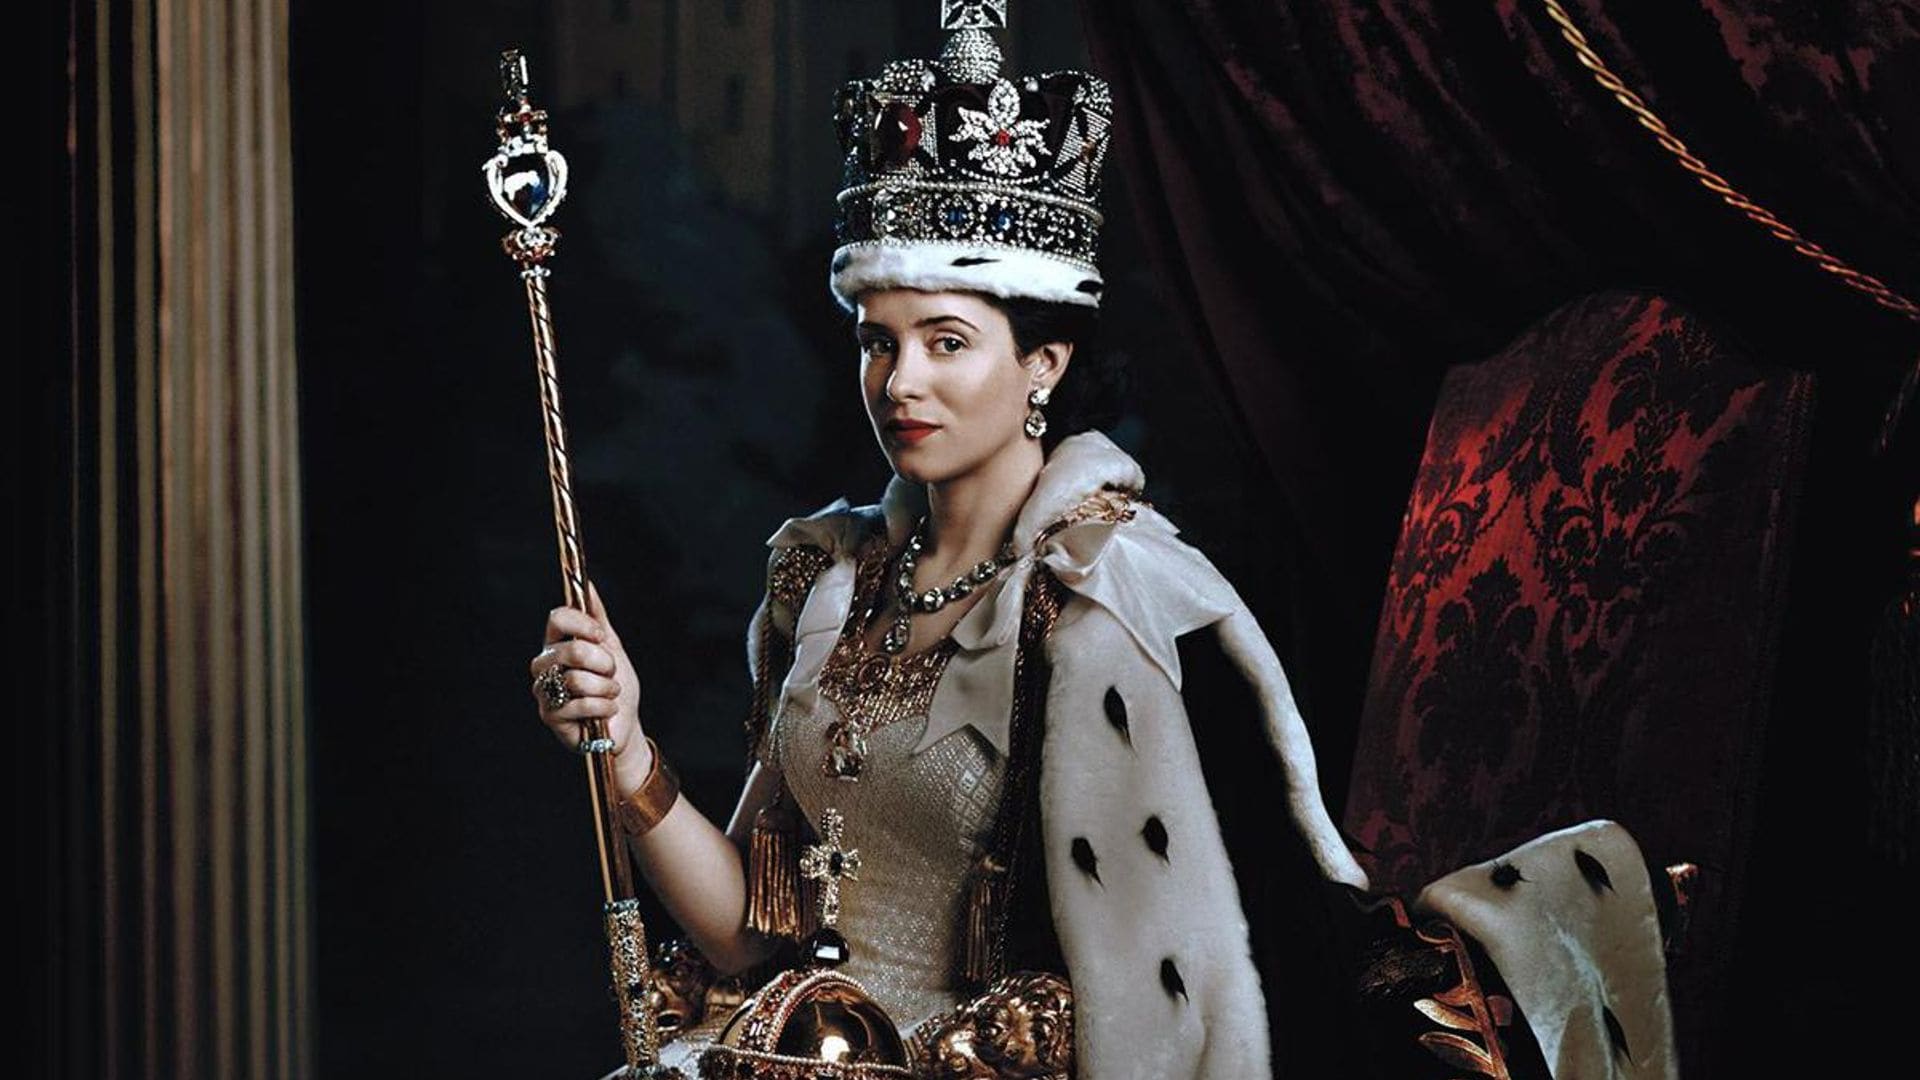 ‘The Crown’ jewels and antiques worth $200,000 stolen from Netflix set